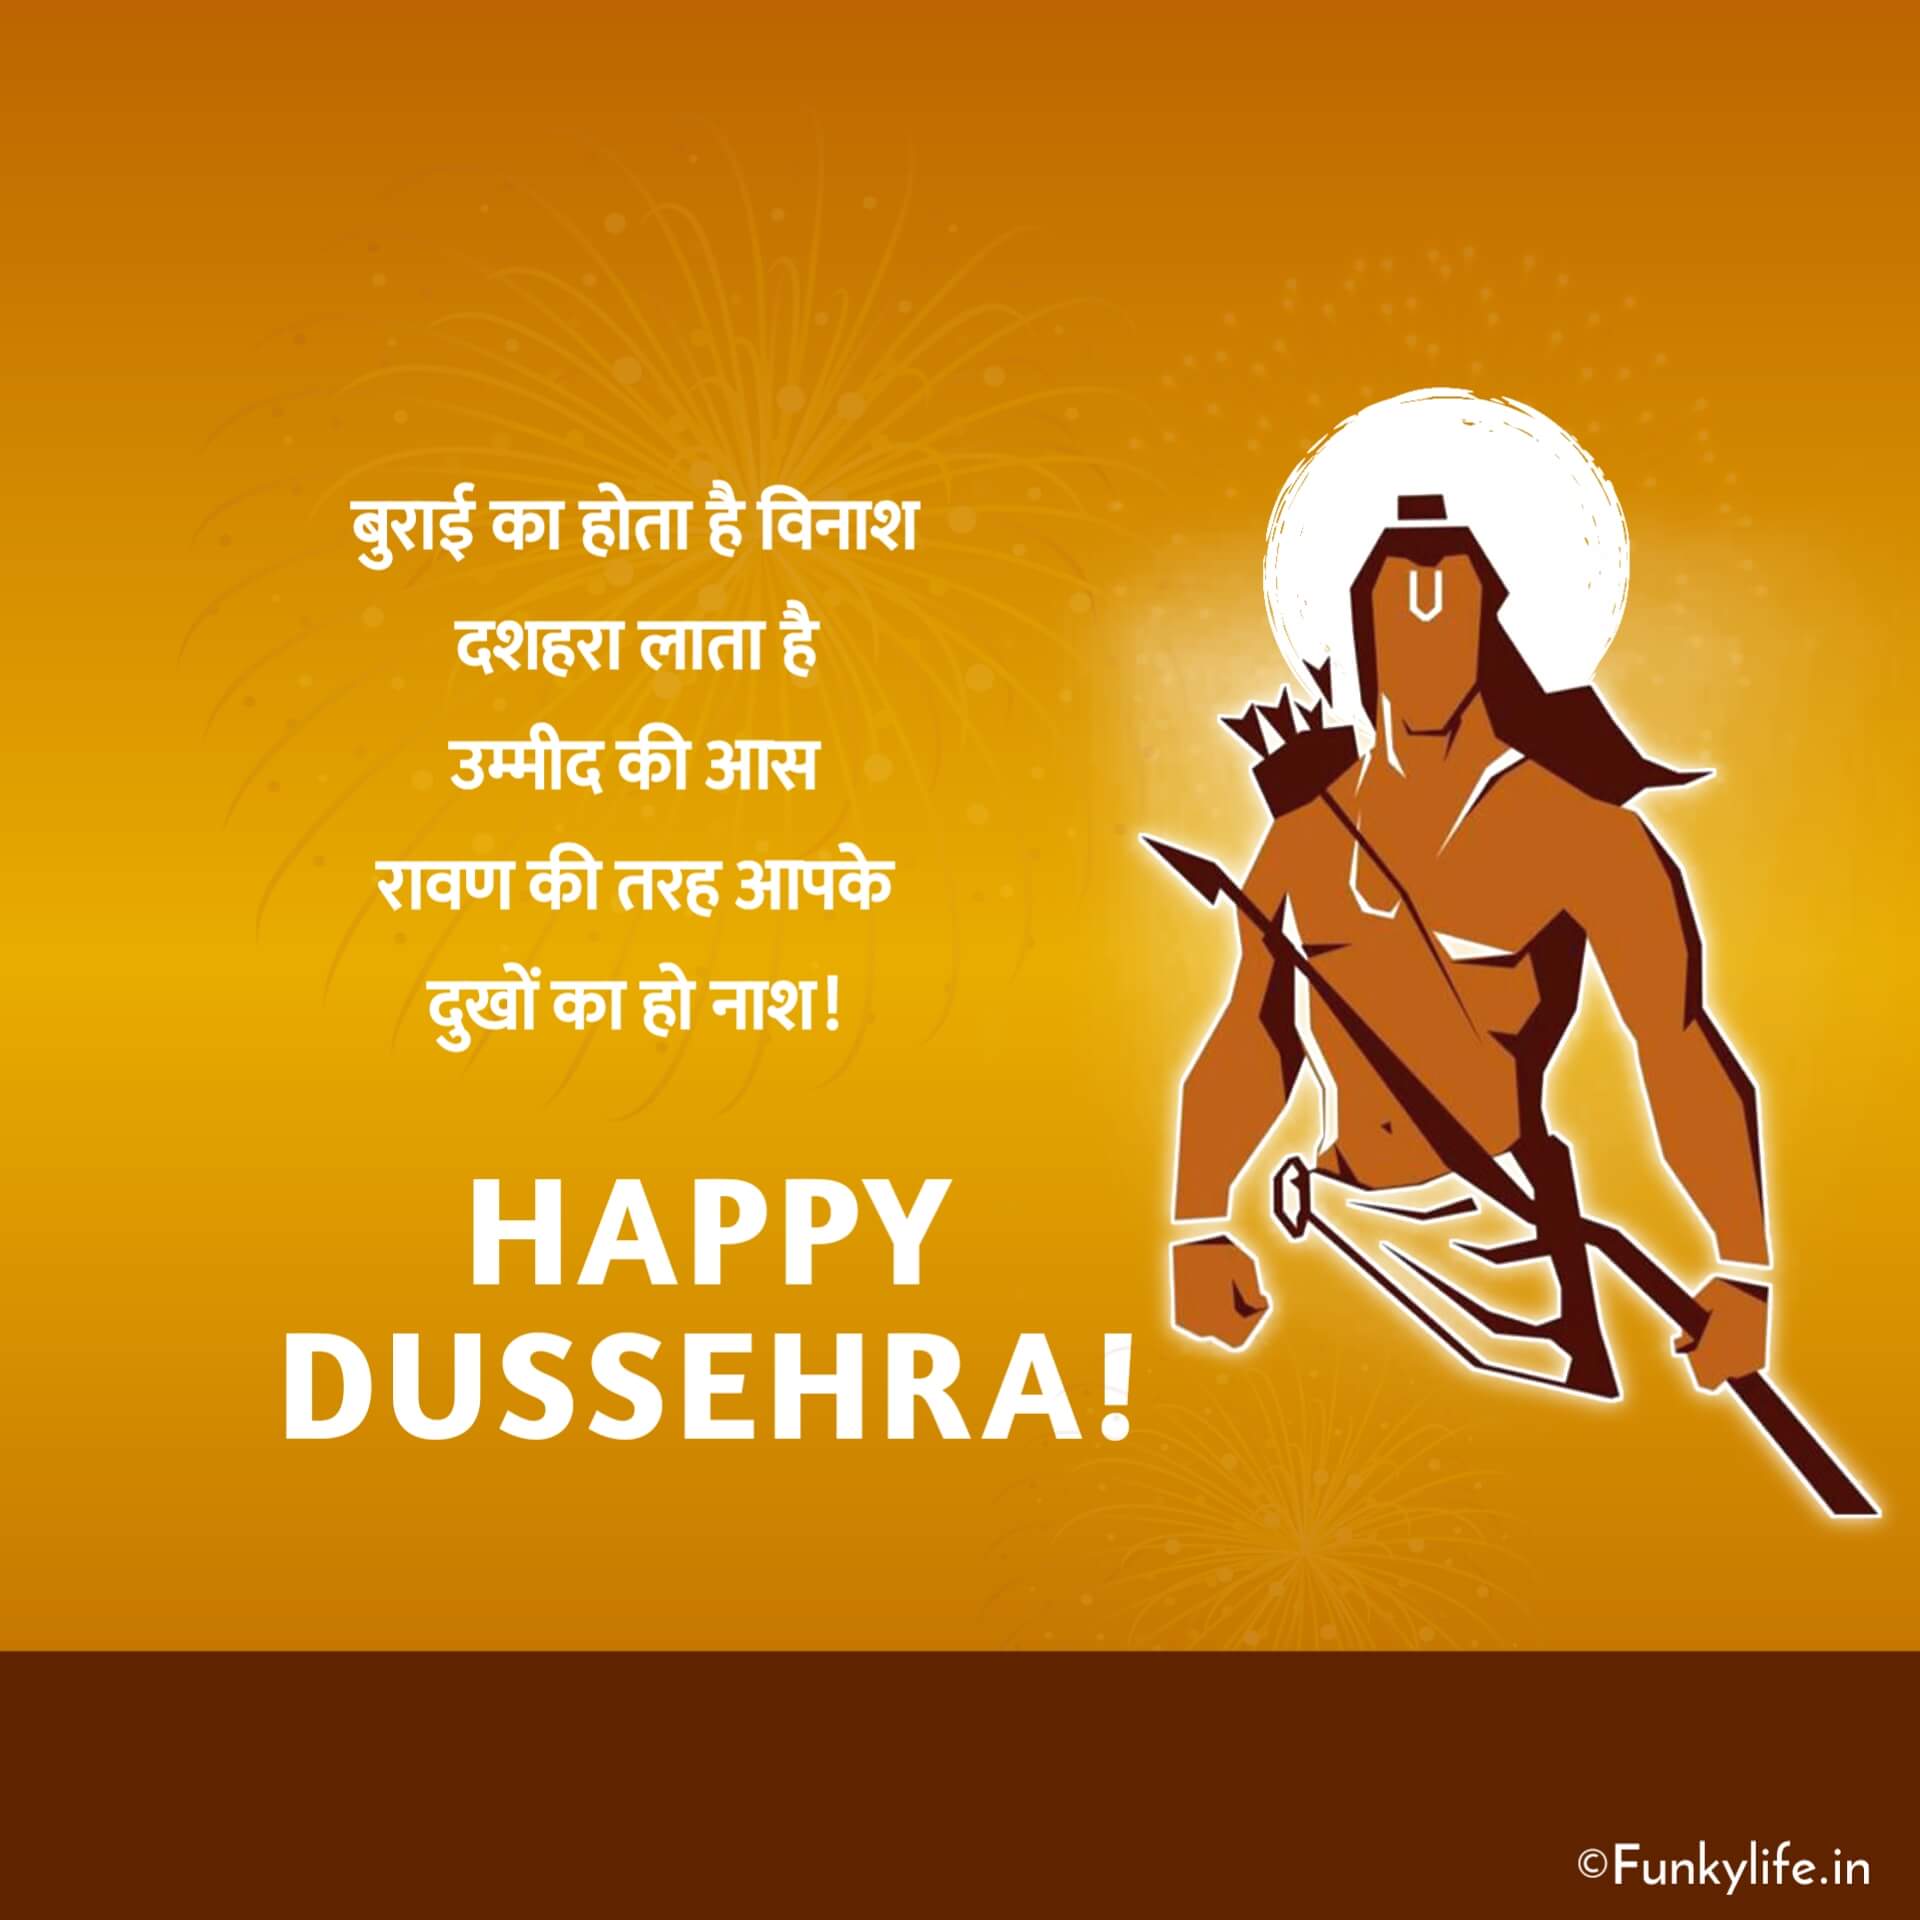 Dussehra Images in Hindi